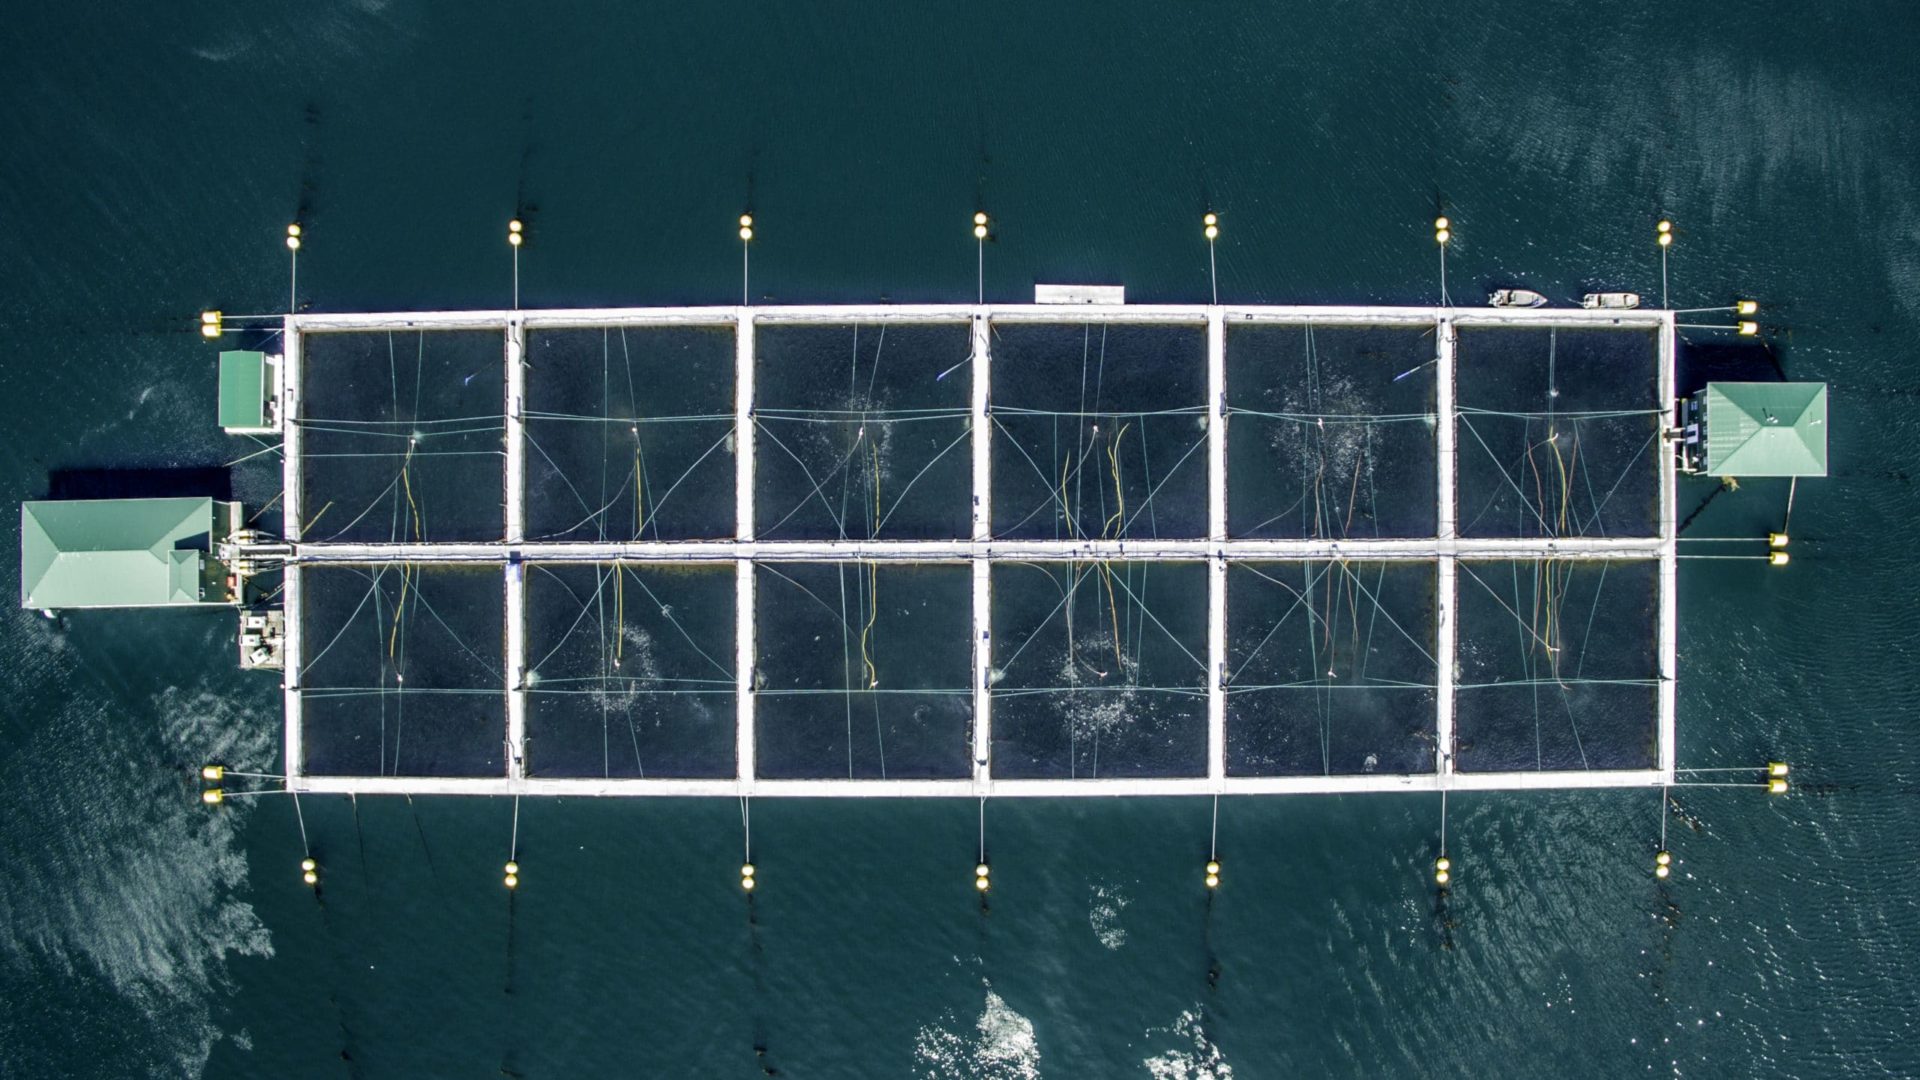 An aerial view shows the top of a fish farm on a body of dark water.